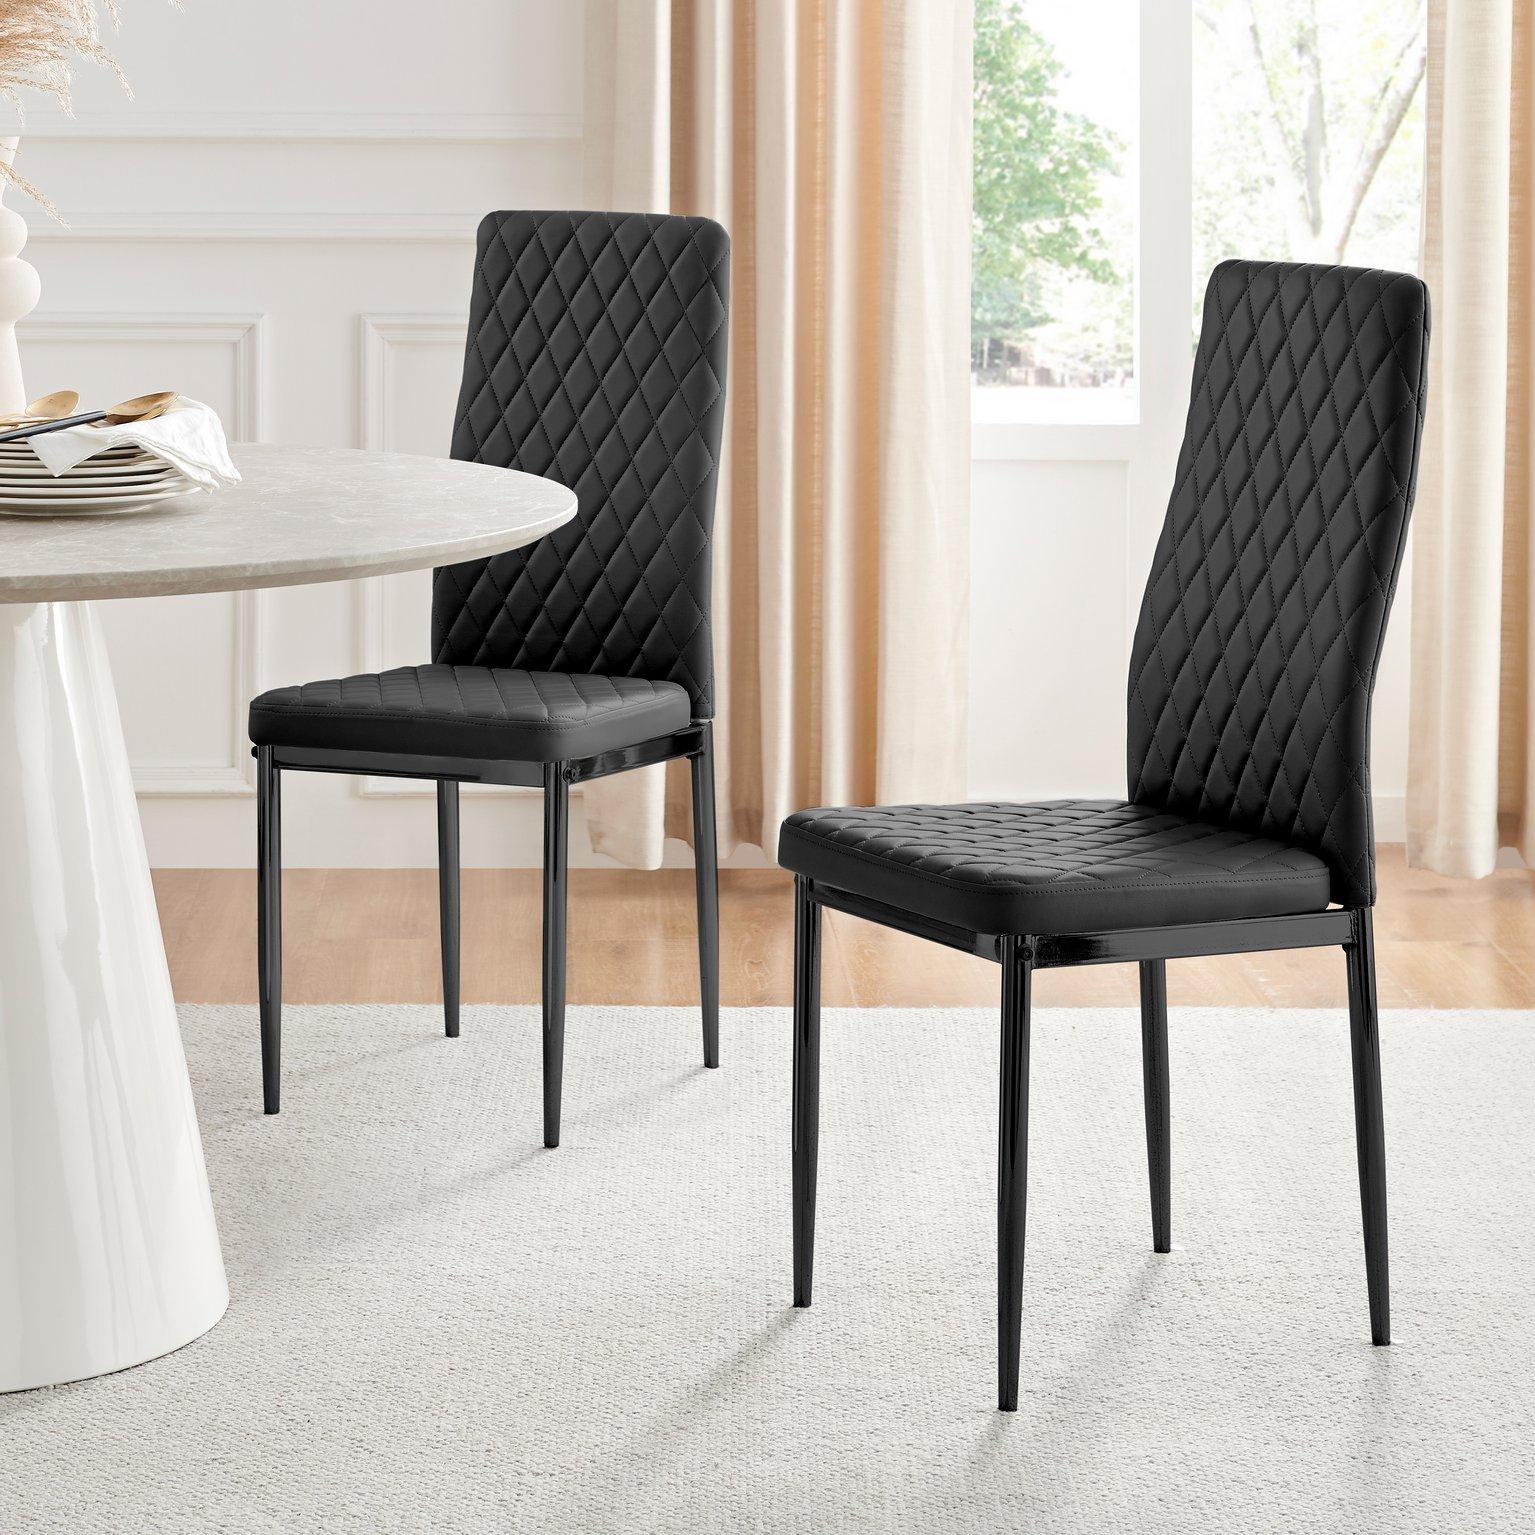 Set of 6 Milan High Back Soft Touch Diamond Pattern Faux Leather Dining Chairs With Black Powder Coa